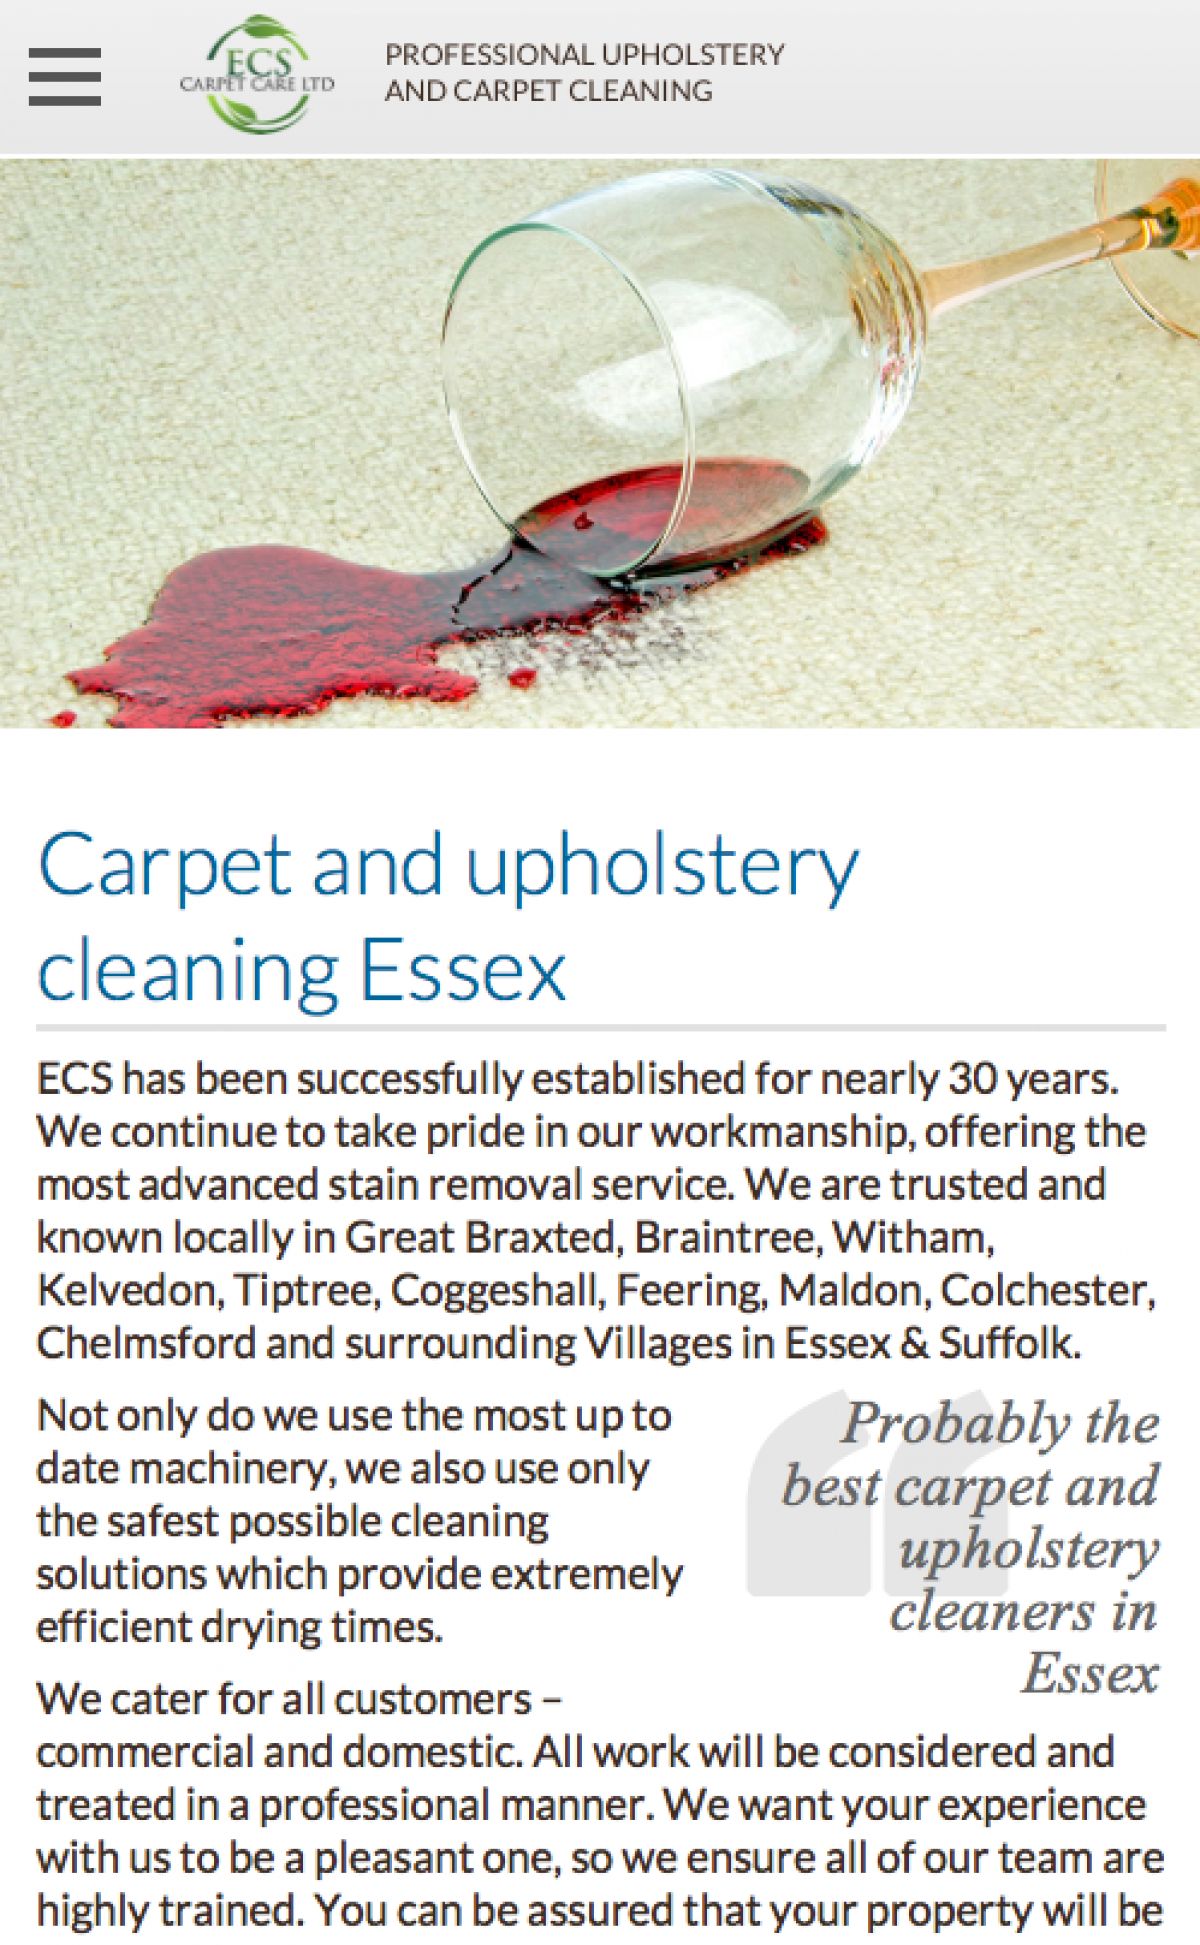 ECS Carpet Care Essex Carpet cleaning buisness with online quotation and booking system